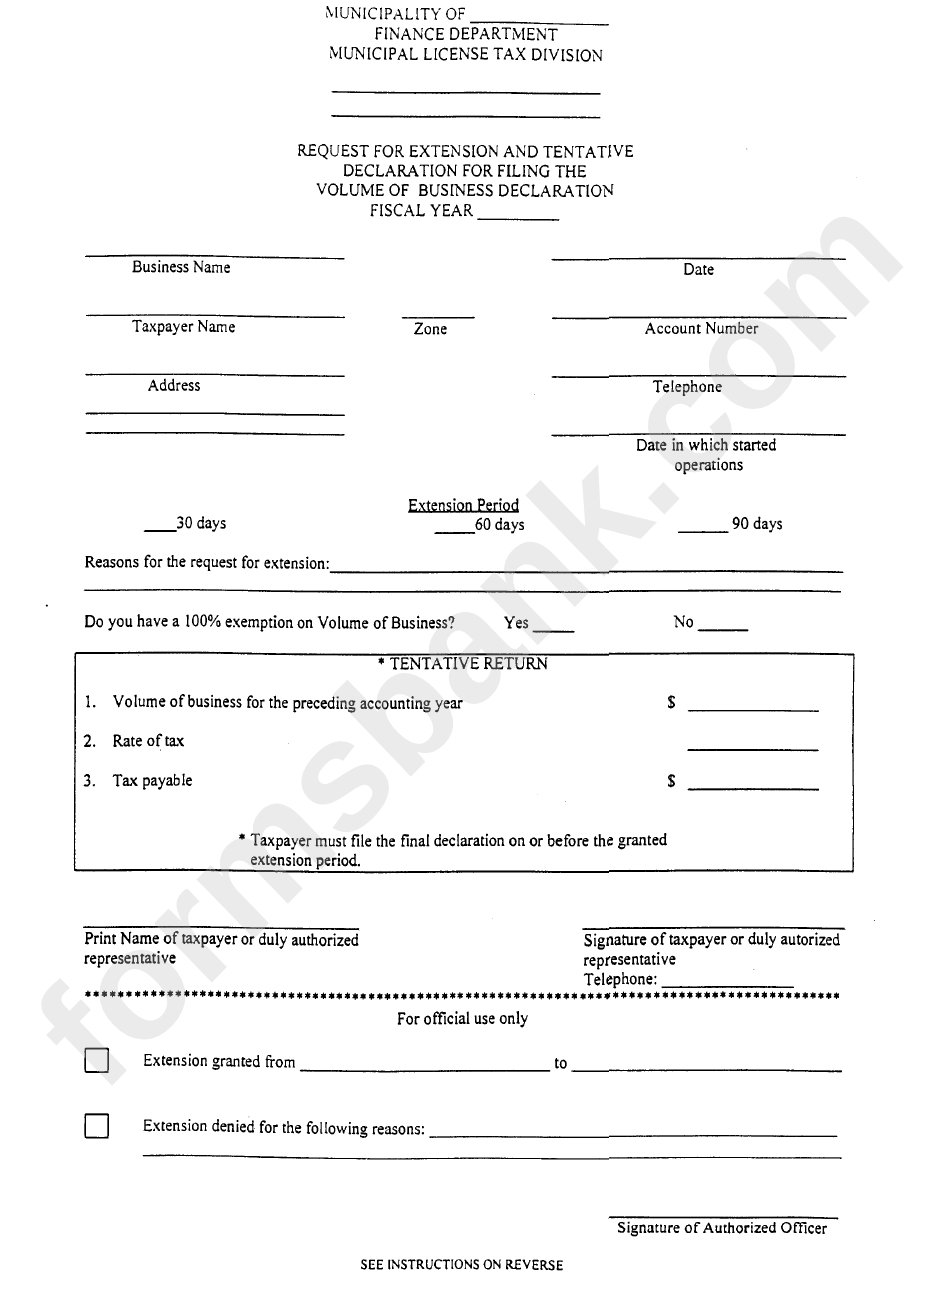 Request For Extension And Tentative Declaration Form printable pdf download